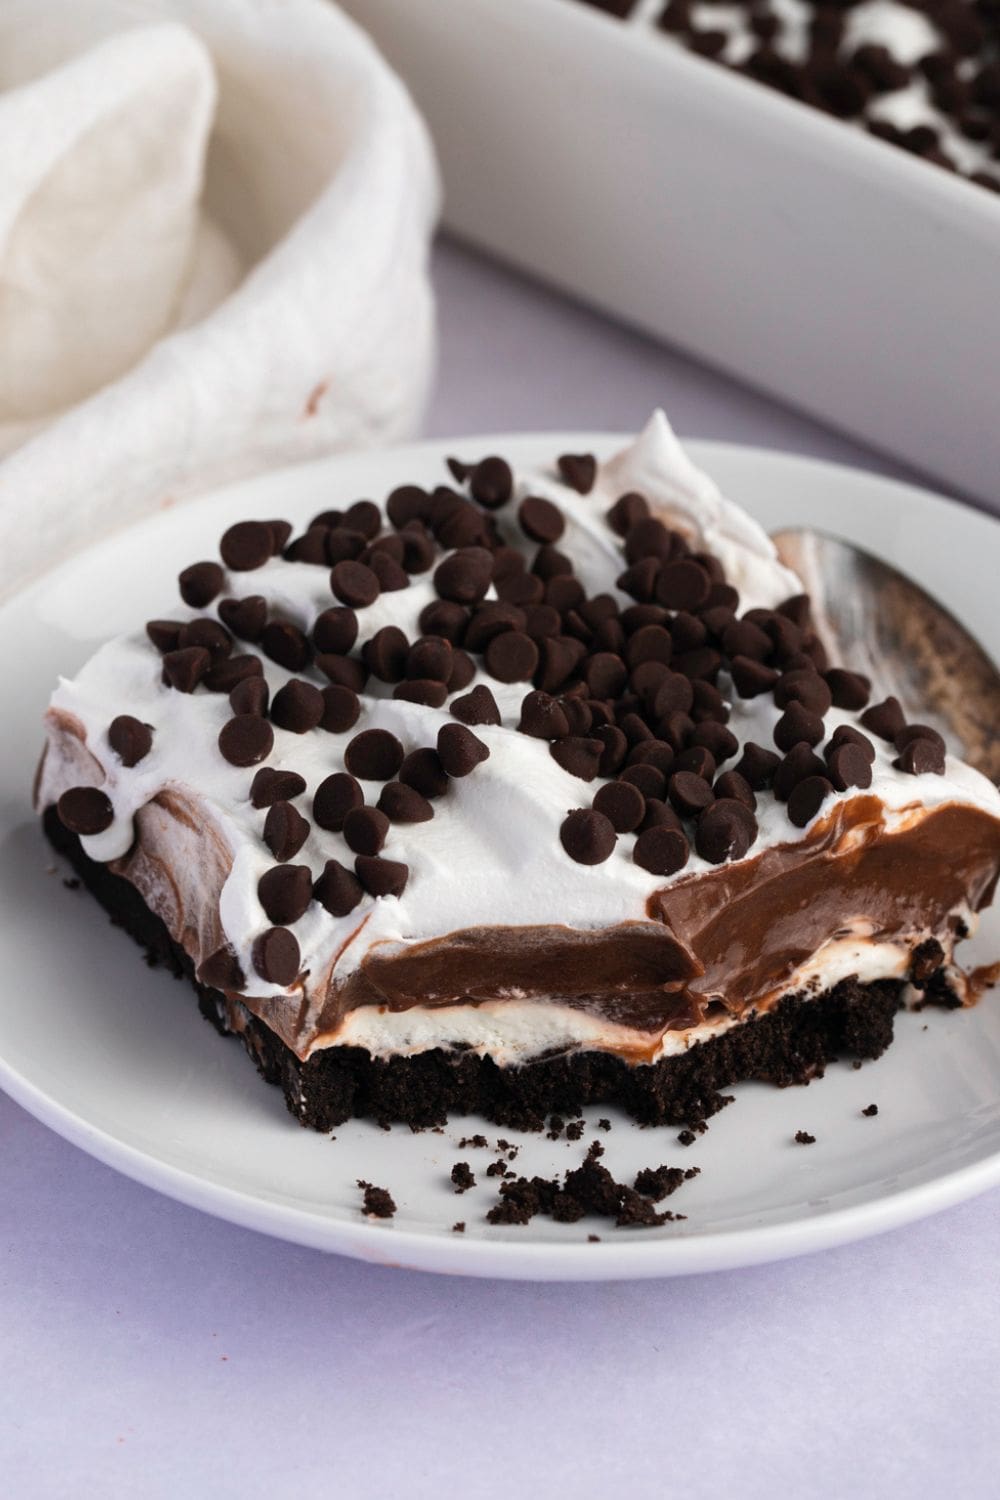 Oreo Lasagna (No-Bake Dessert Recipe) featuring Sweet Homemade Oreo Lasagna Dessert with Oreo Cookies, Chocolate Pudding Layer, Cream Cheese Layer, Whipped Cream, and Chocolate Chip Cookies